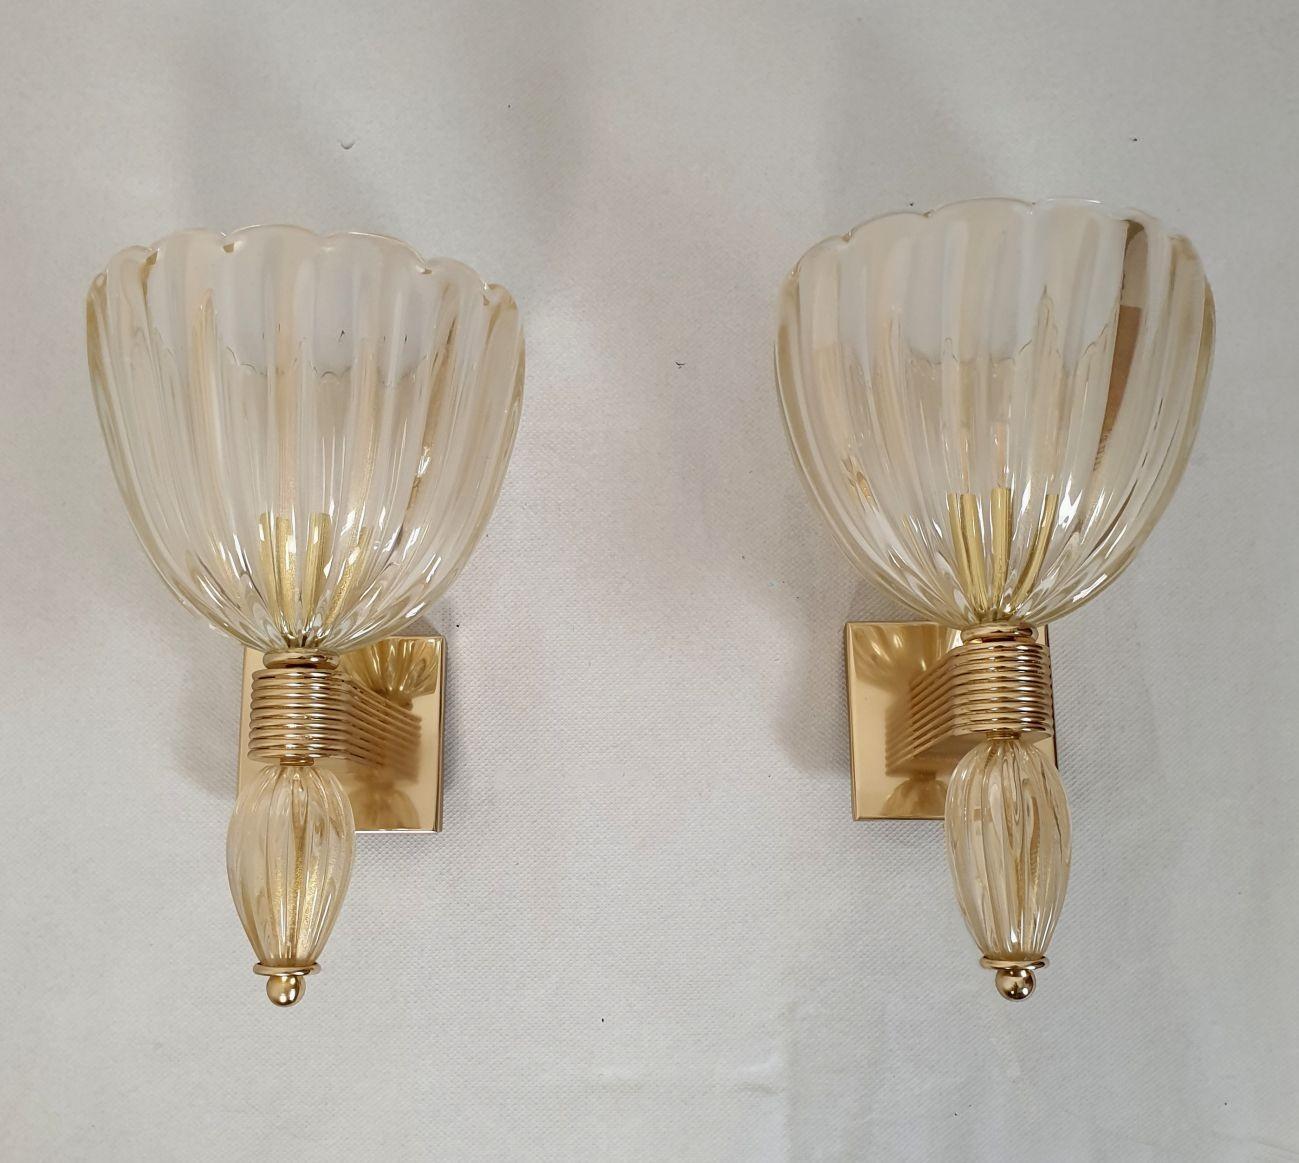 Pair of large Murano glass Mid-Century Modern sconces, attributed to Barovier & Toso, Italy 1980s.
Set of four sconces or two pairs available.
Sold and priced by pair.
The neoclassical sconces are made of a clear Murano glass, with real 24 carats